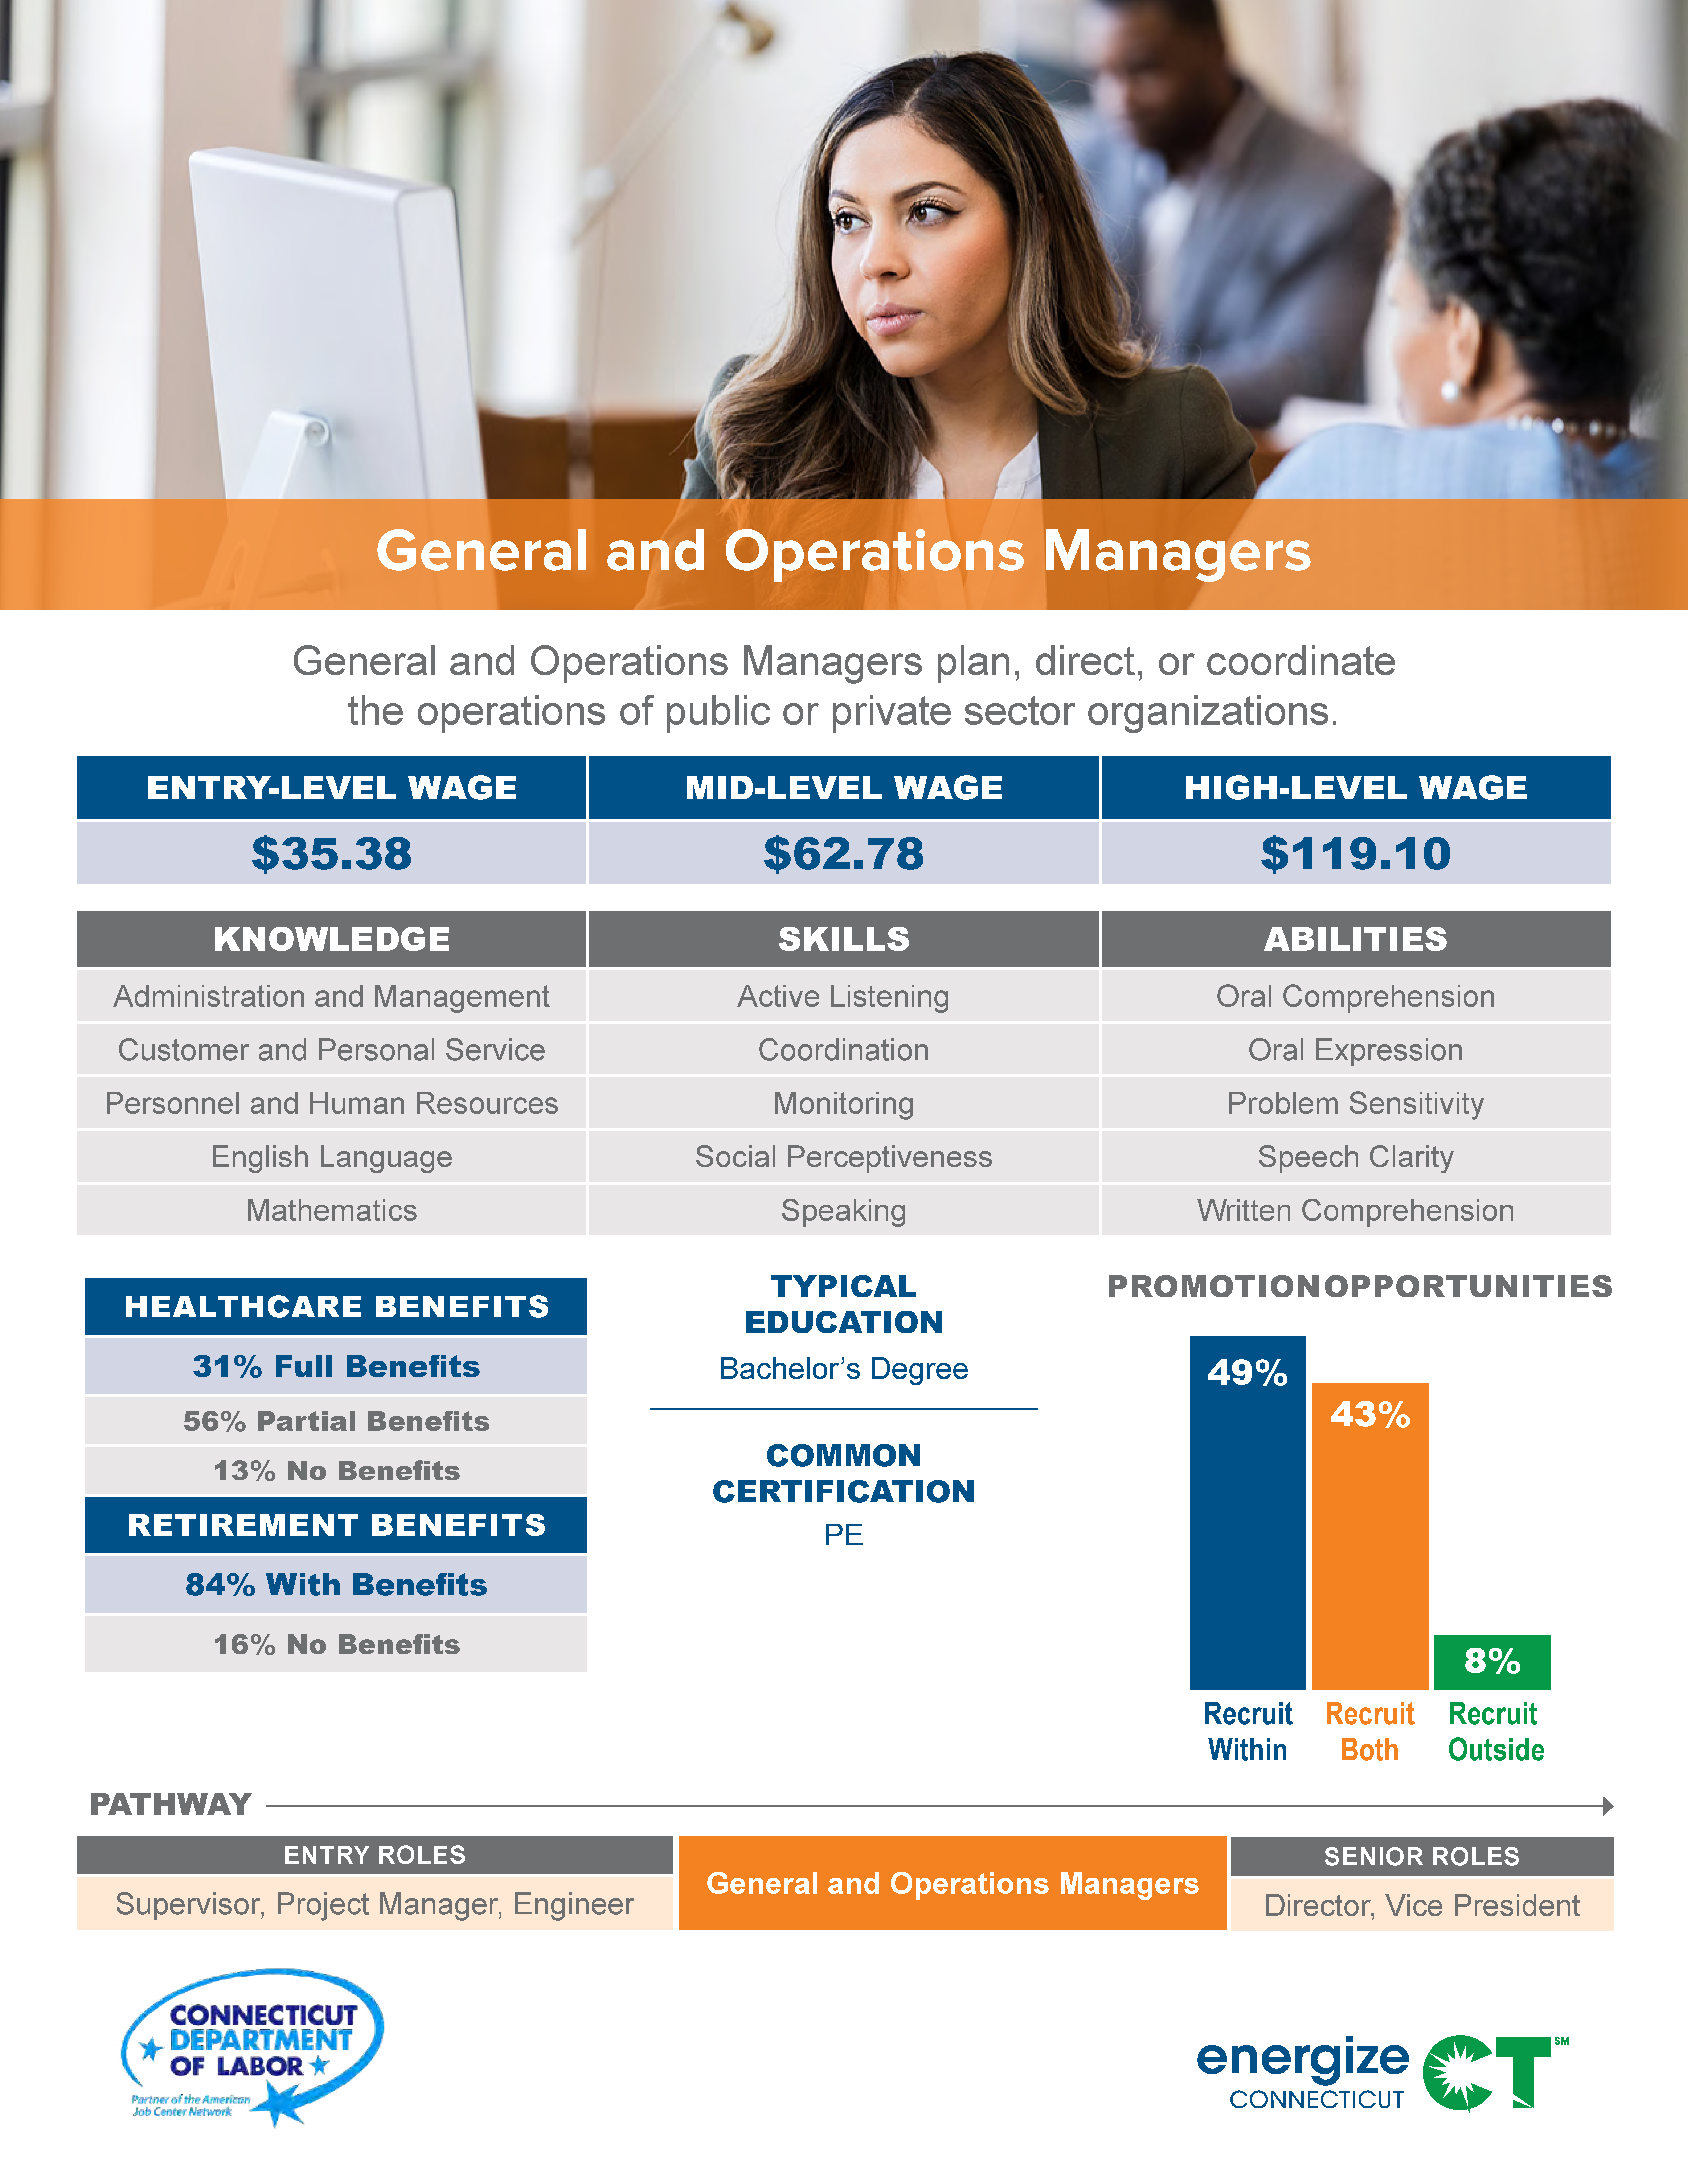 General and Operations Managers